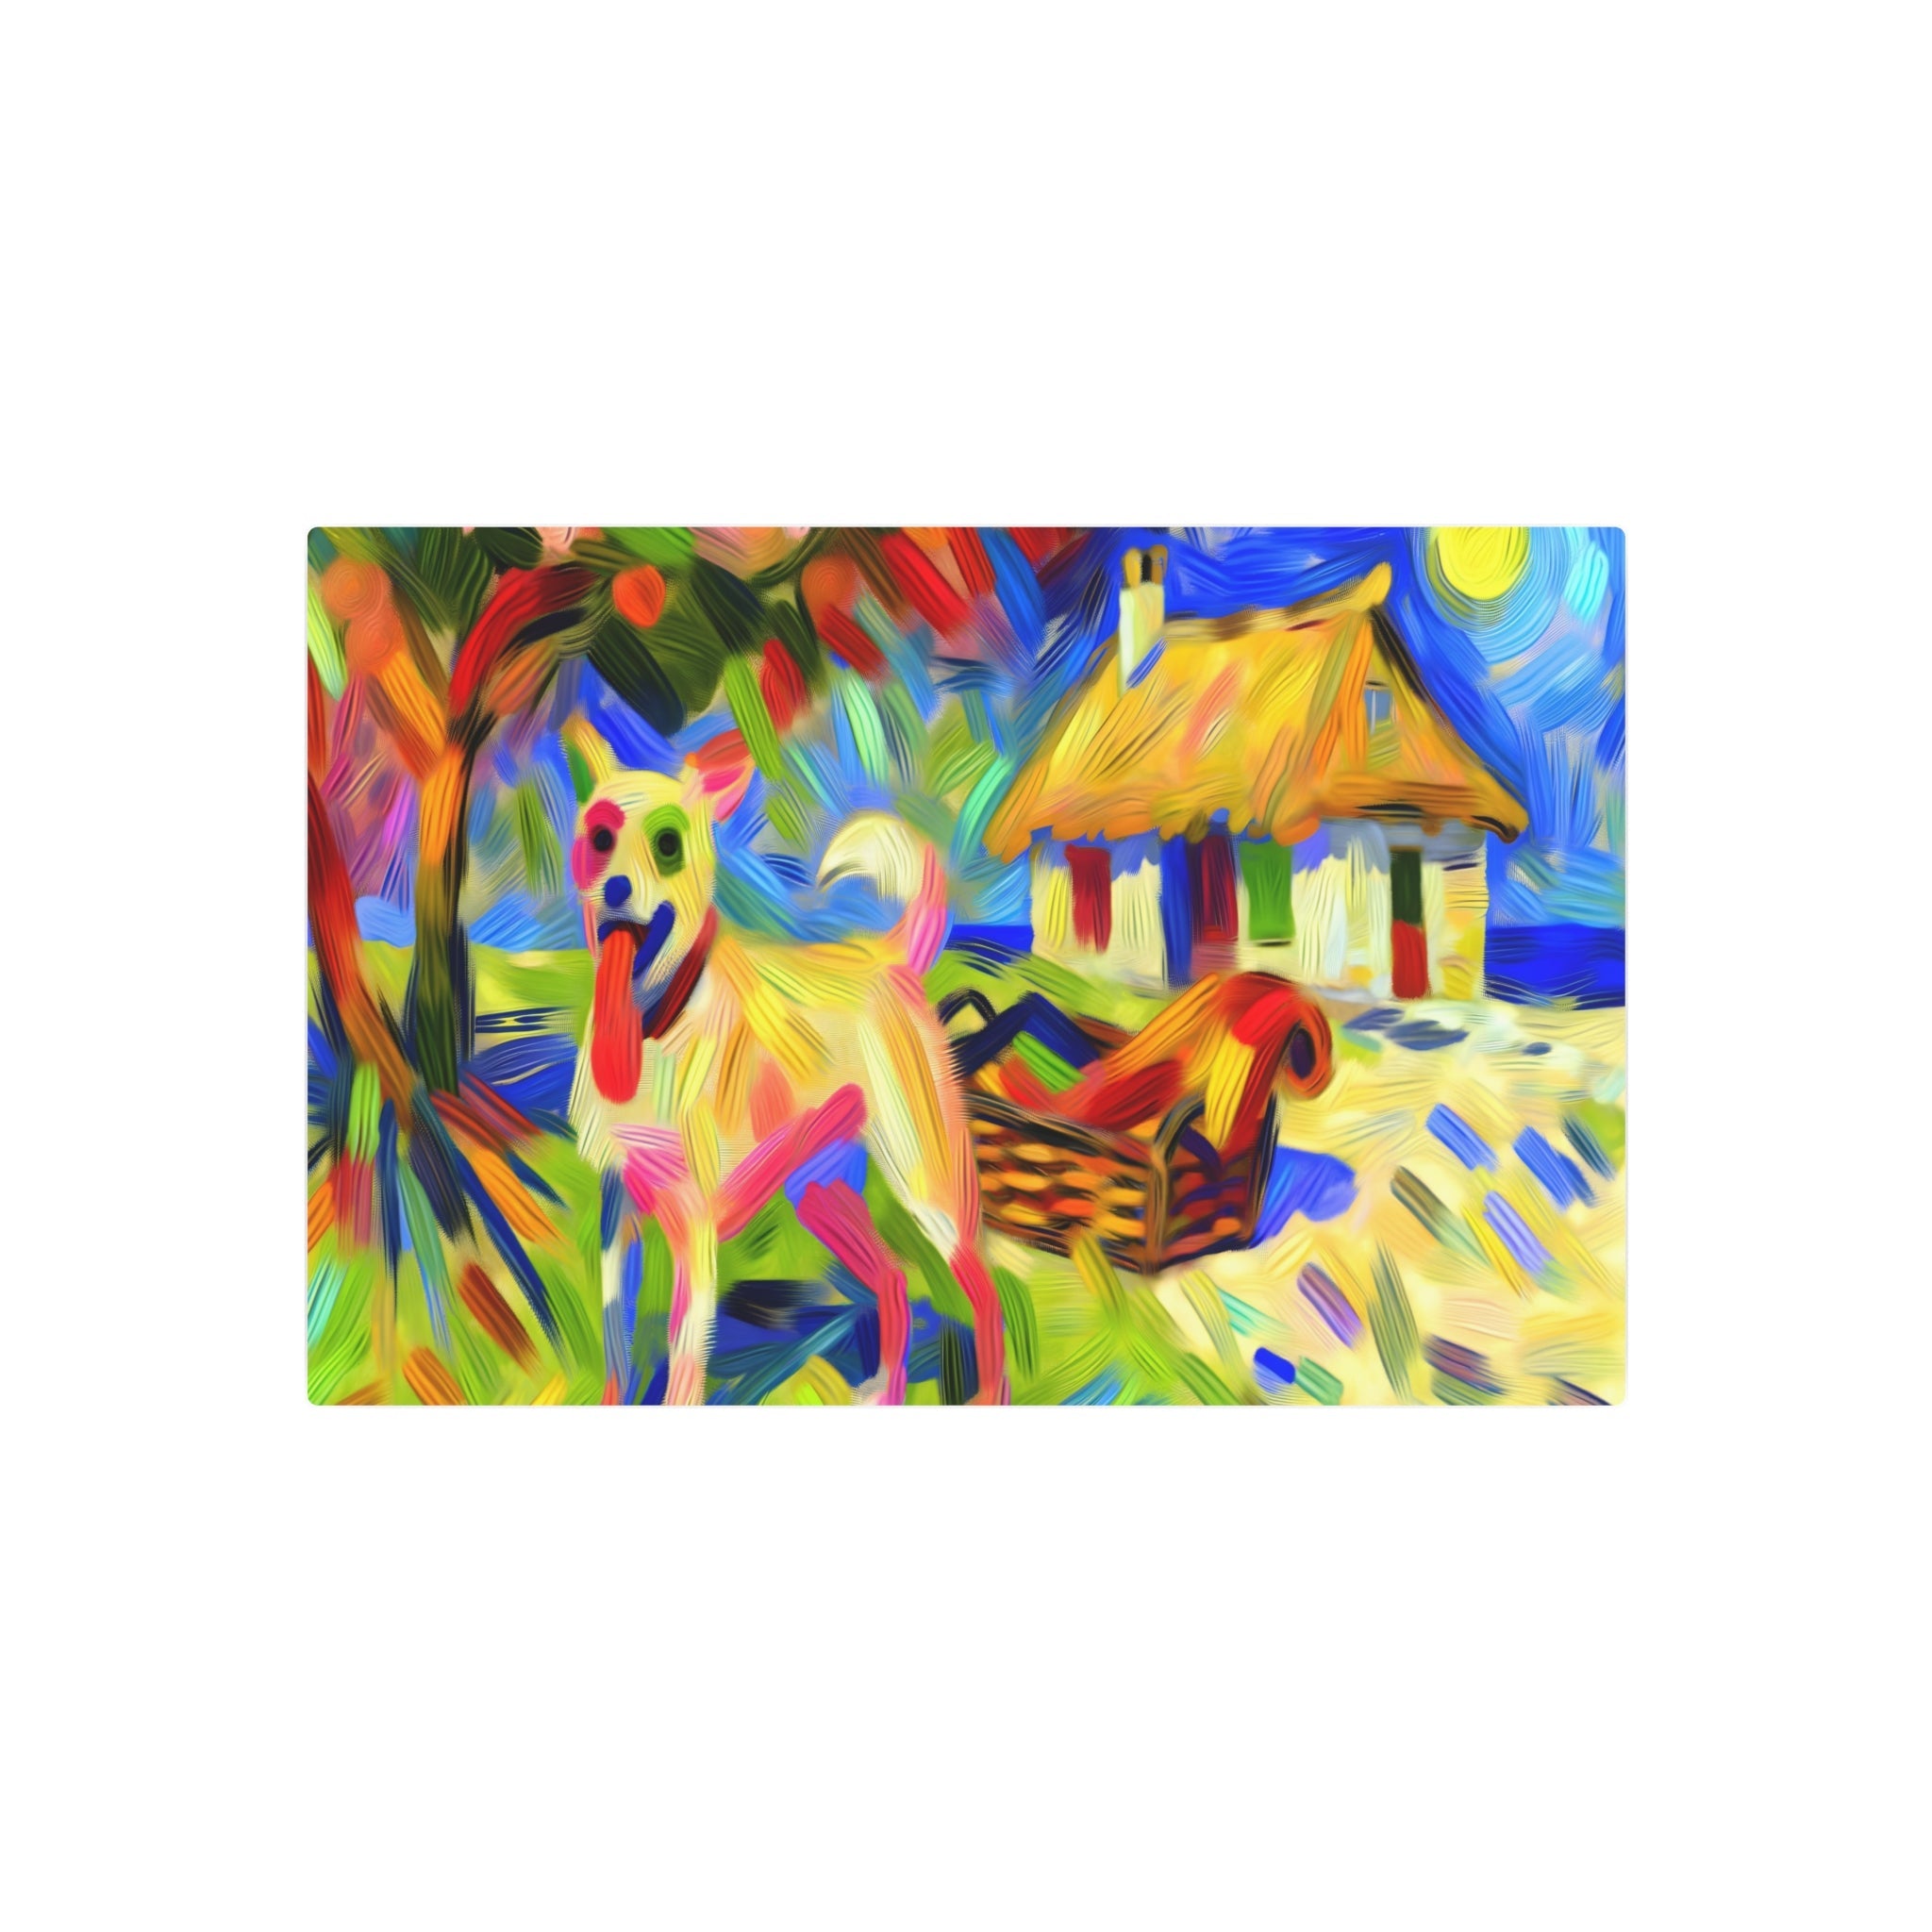 Metal Poster Art | "Post-Impressionist Western Art Style - Lively and Colorful Dog Scene Painting" - Metal Poster Art 30″ x 20″ (Horizontal) 0.12''